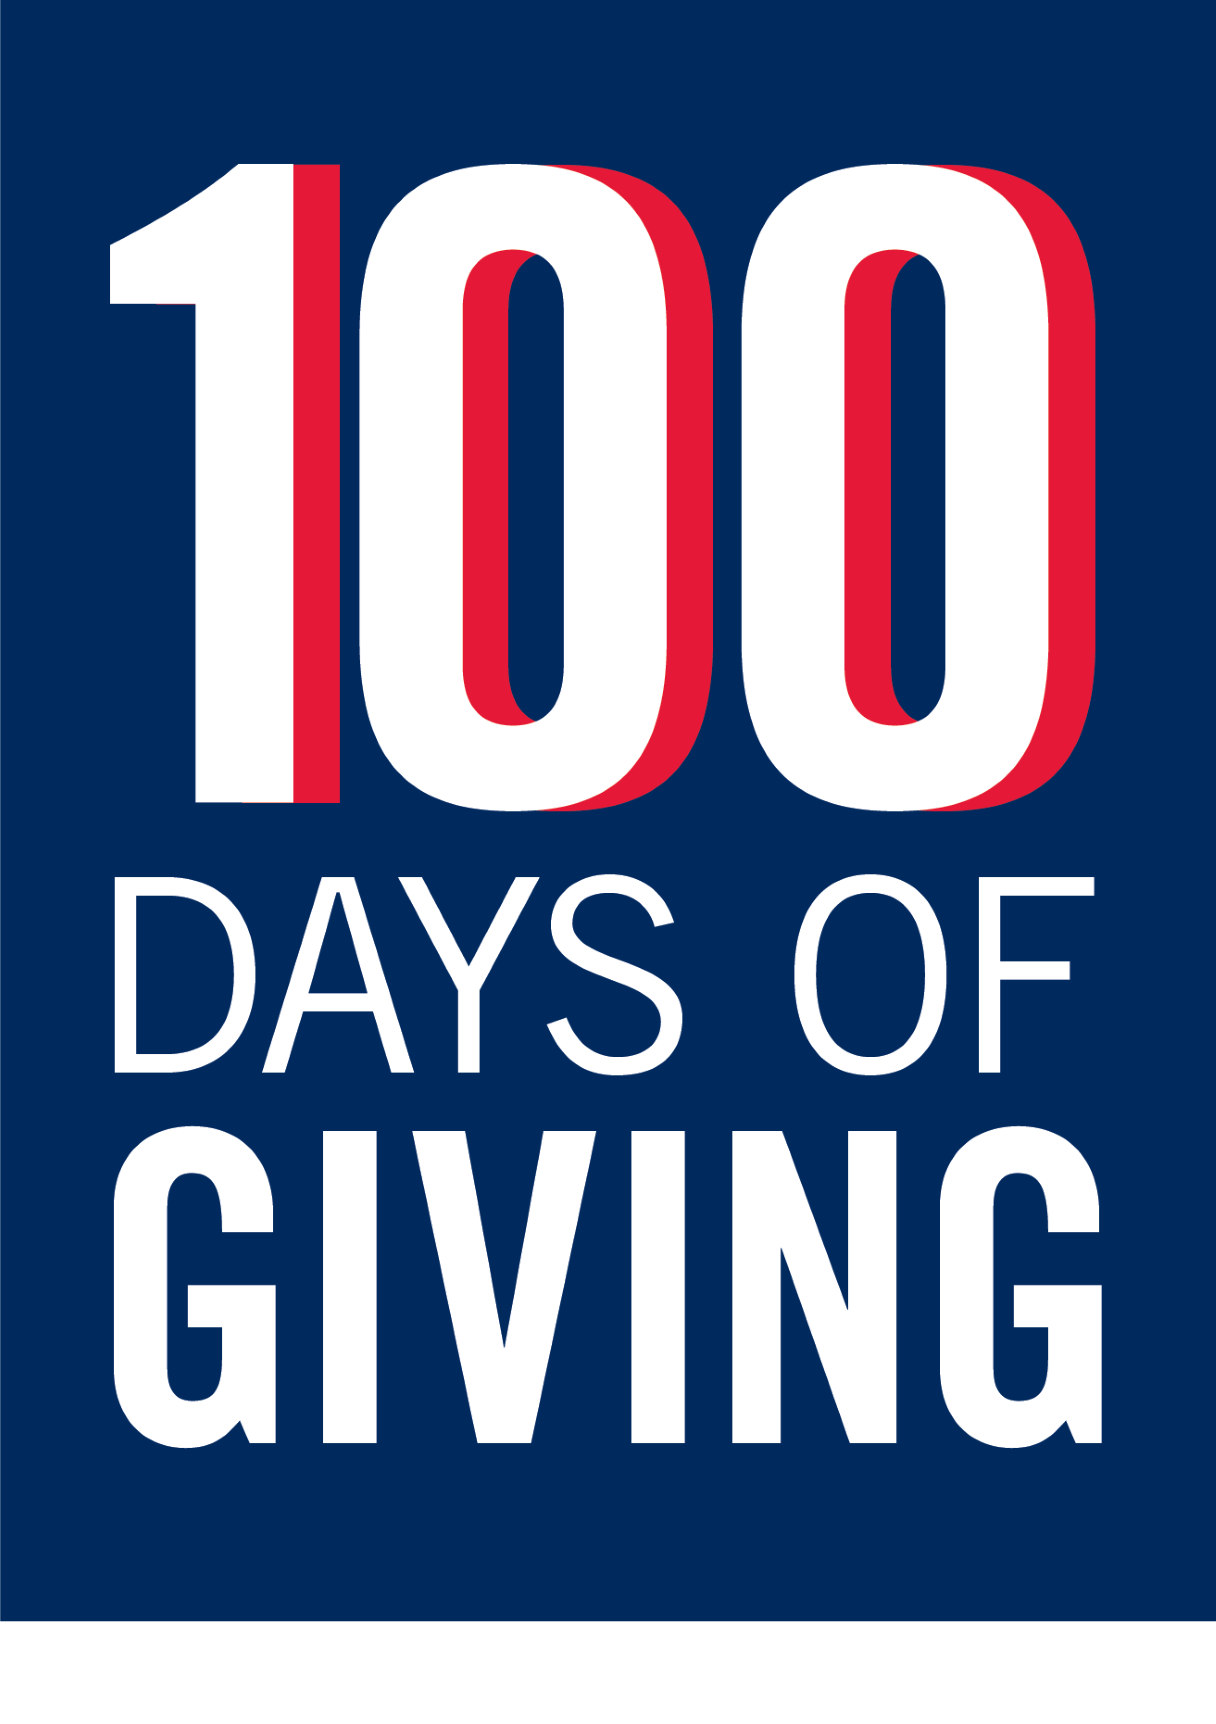 A blue and white images that says, "100 days of giving."